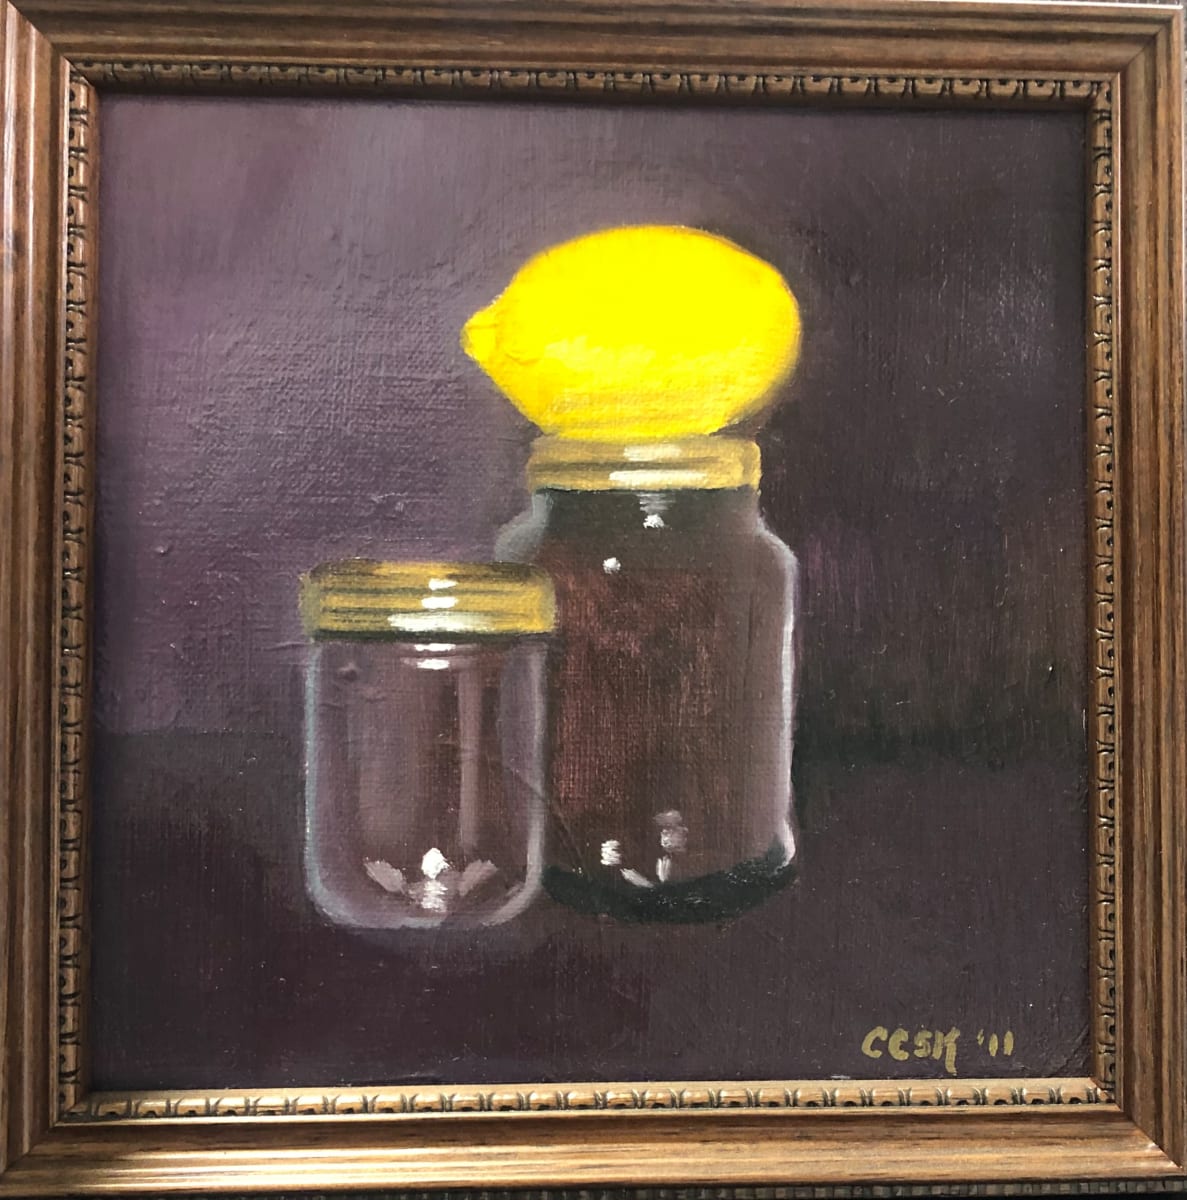 Two Jars and A Lemon by Carolyn Kleinberger  